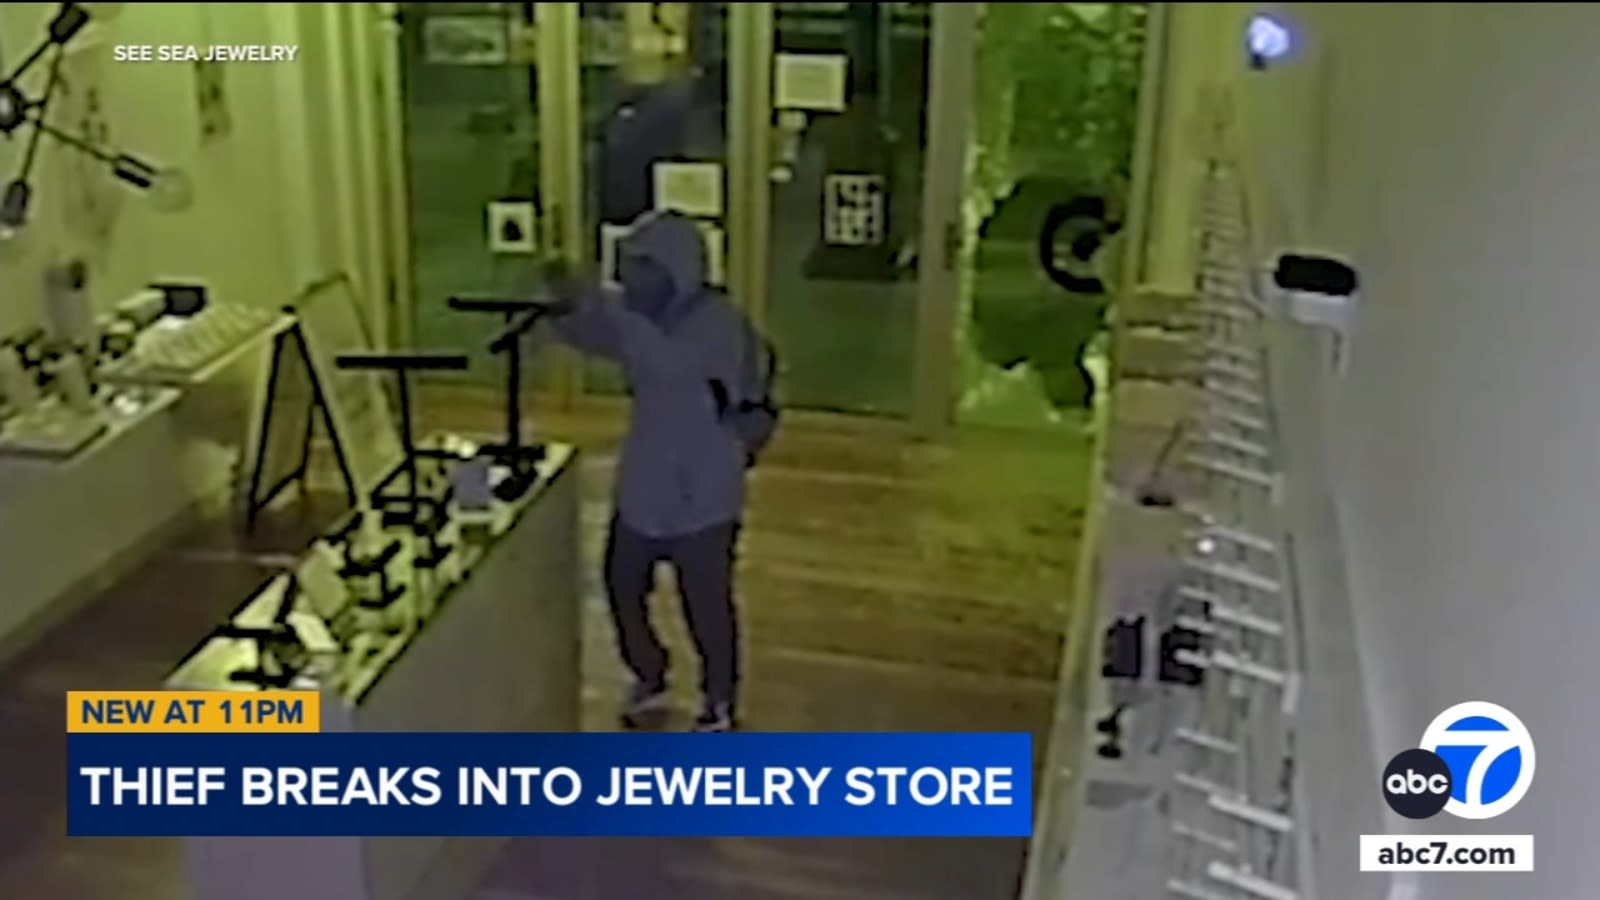 Video shows thief breaking into Santa Monica jewelry store, stealing about $4,000 worth of items